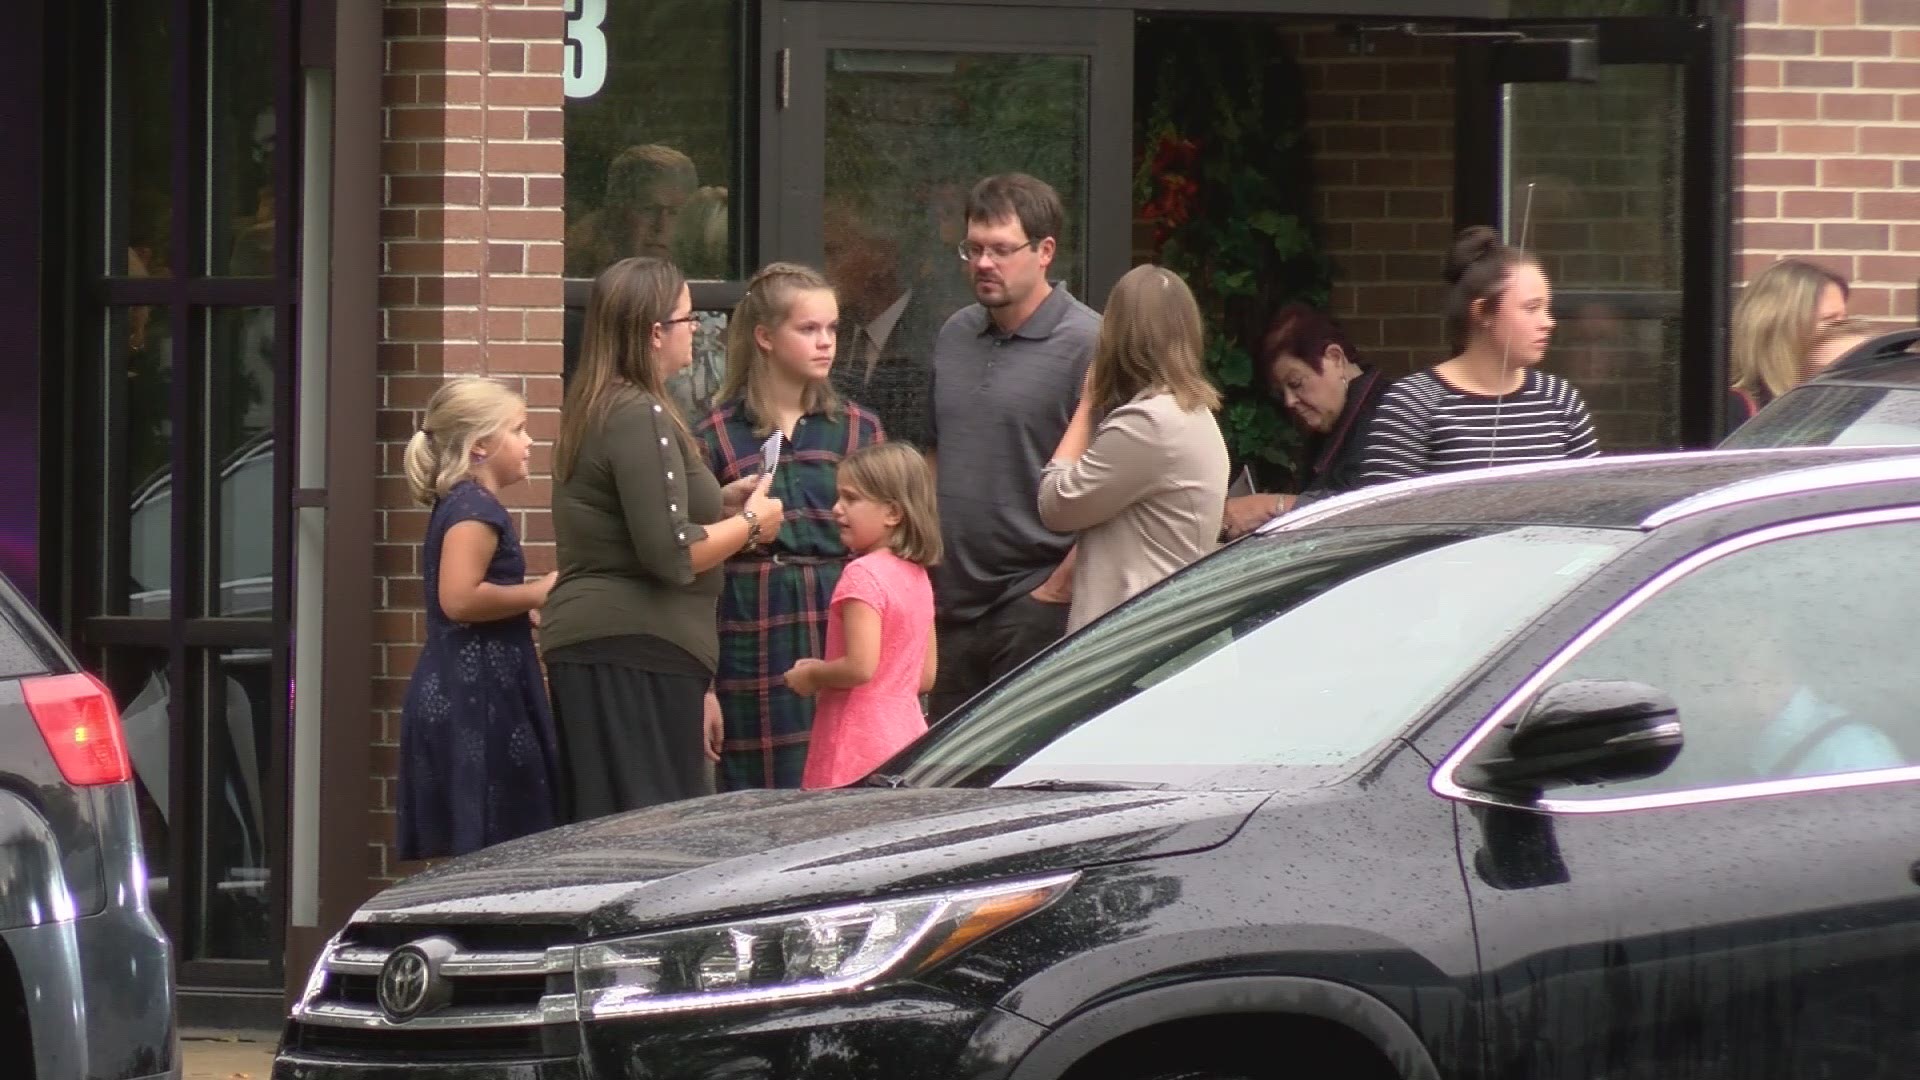 Hundreds turned out at a Rochester church Thursday to say farewells to a mother and daughter who died after a violent crash caused by a man who authorities call a distracted driver.